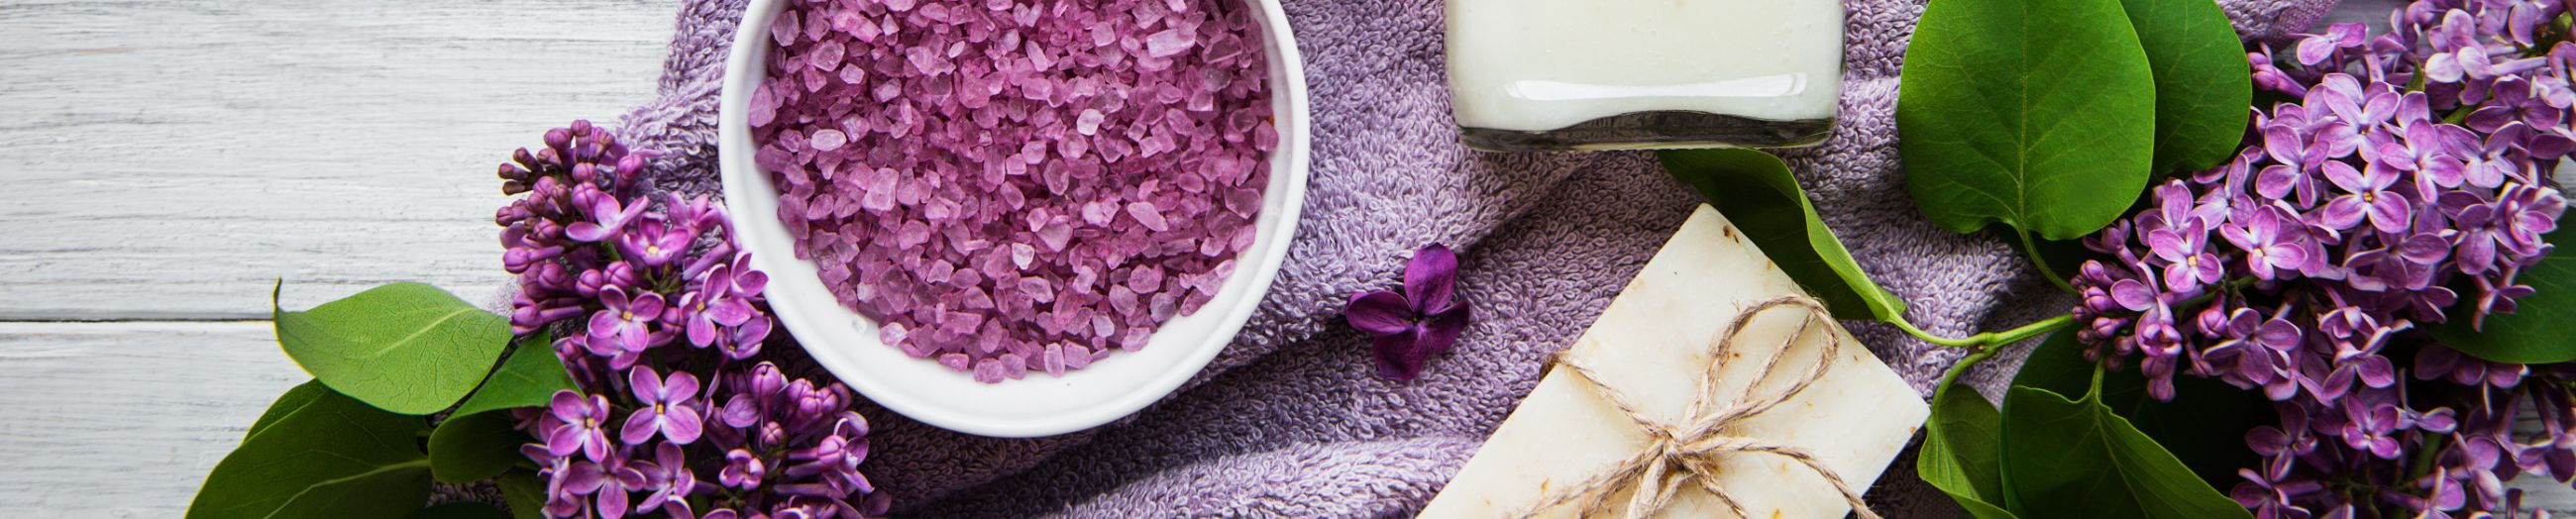 We offer a comprehensive range of beauty services from facial treatments to nail care.